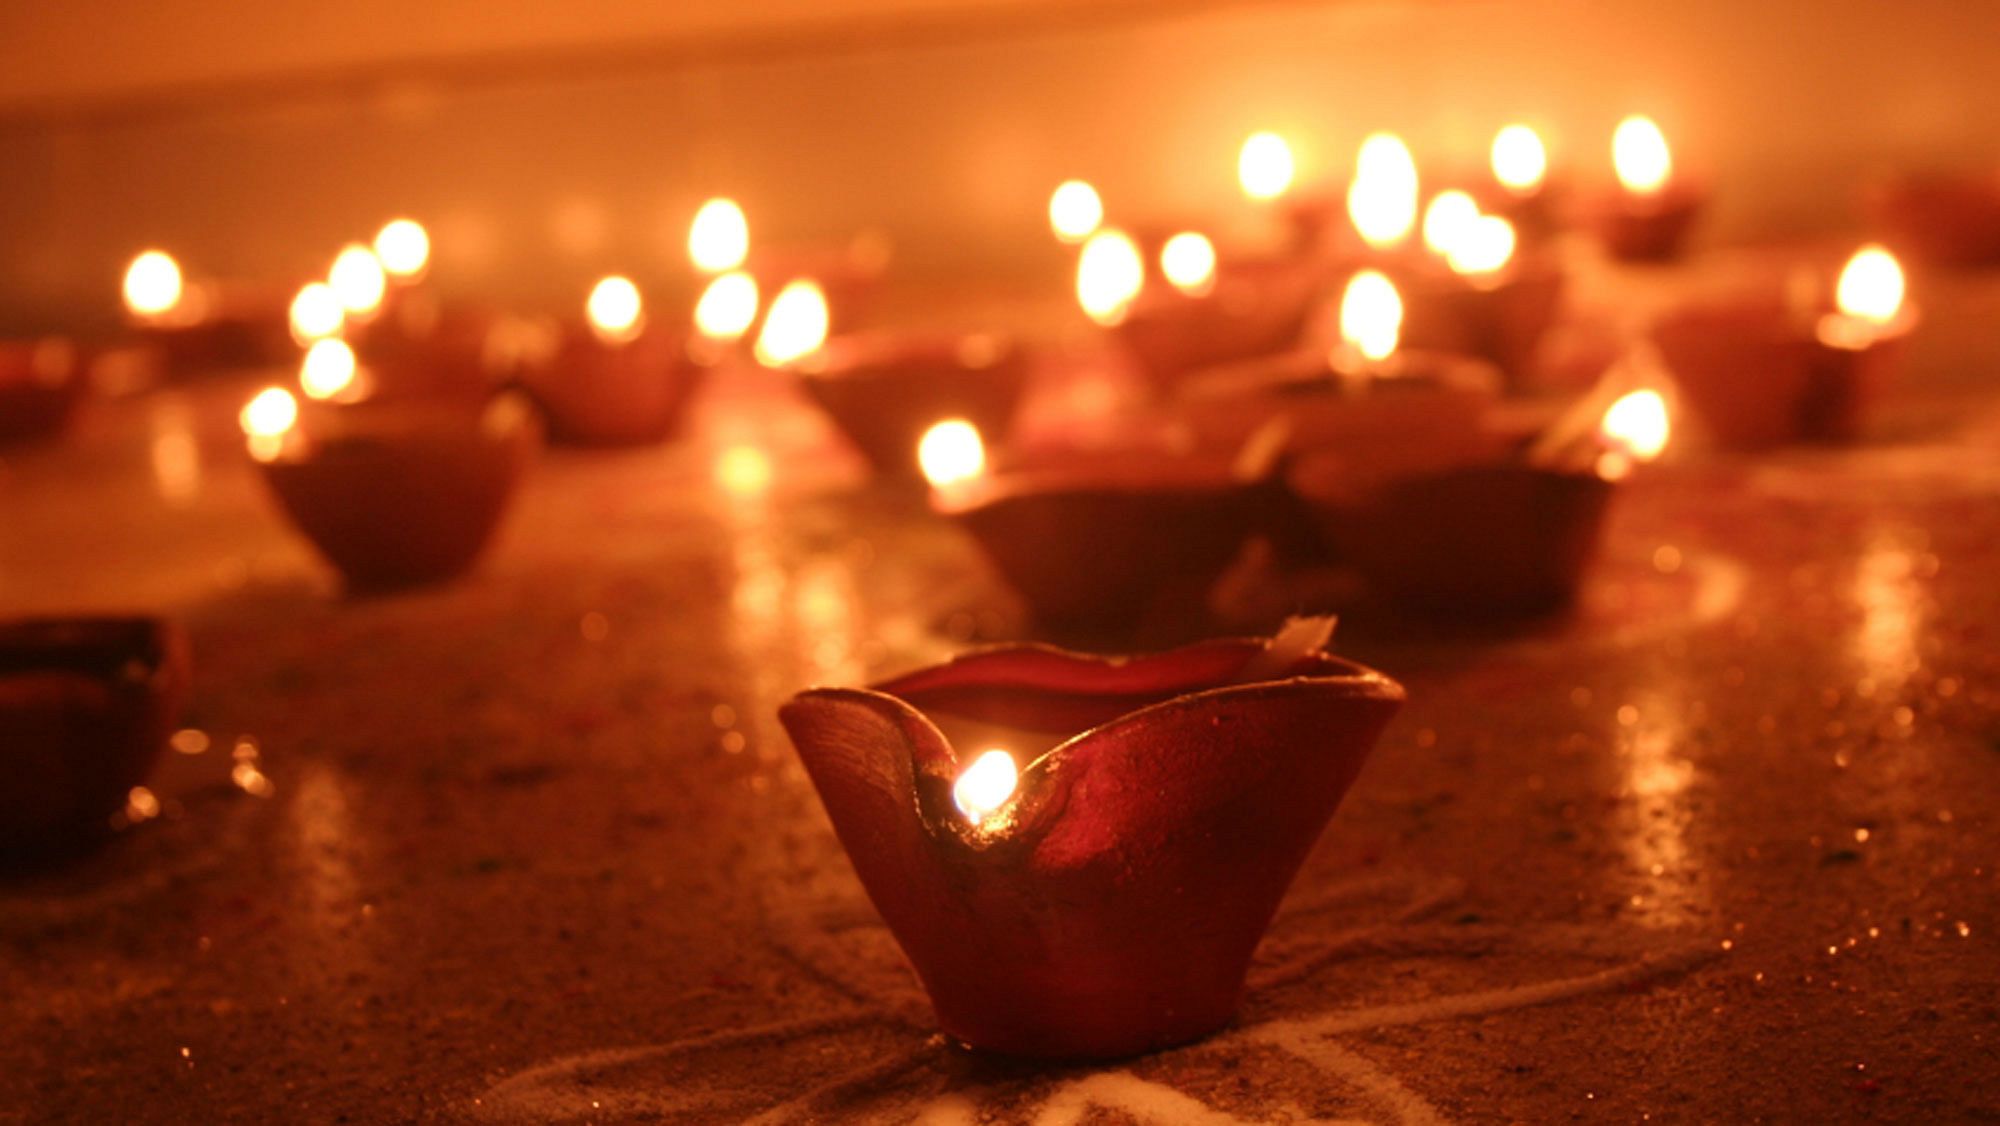 My 87-year-old father, ‘Anna’, gave in to the hopelessness of Parkinson’s – till he lit a diya ahead of this Diwali. (Photo Courtesy: iStock)